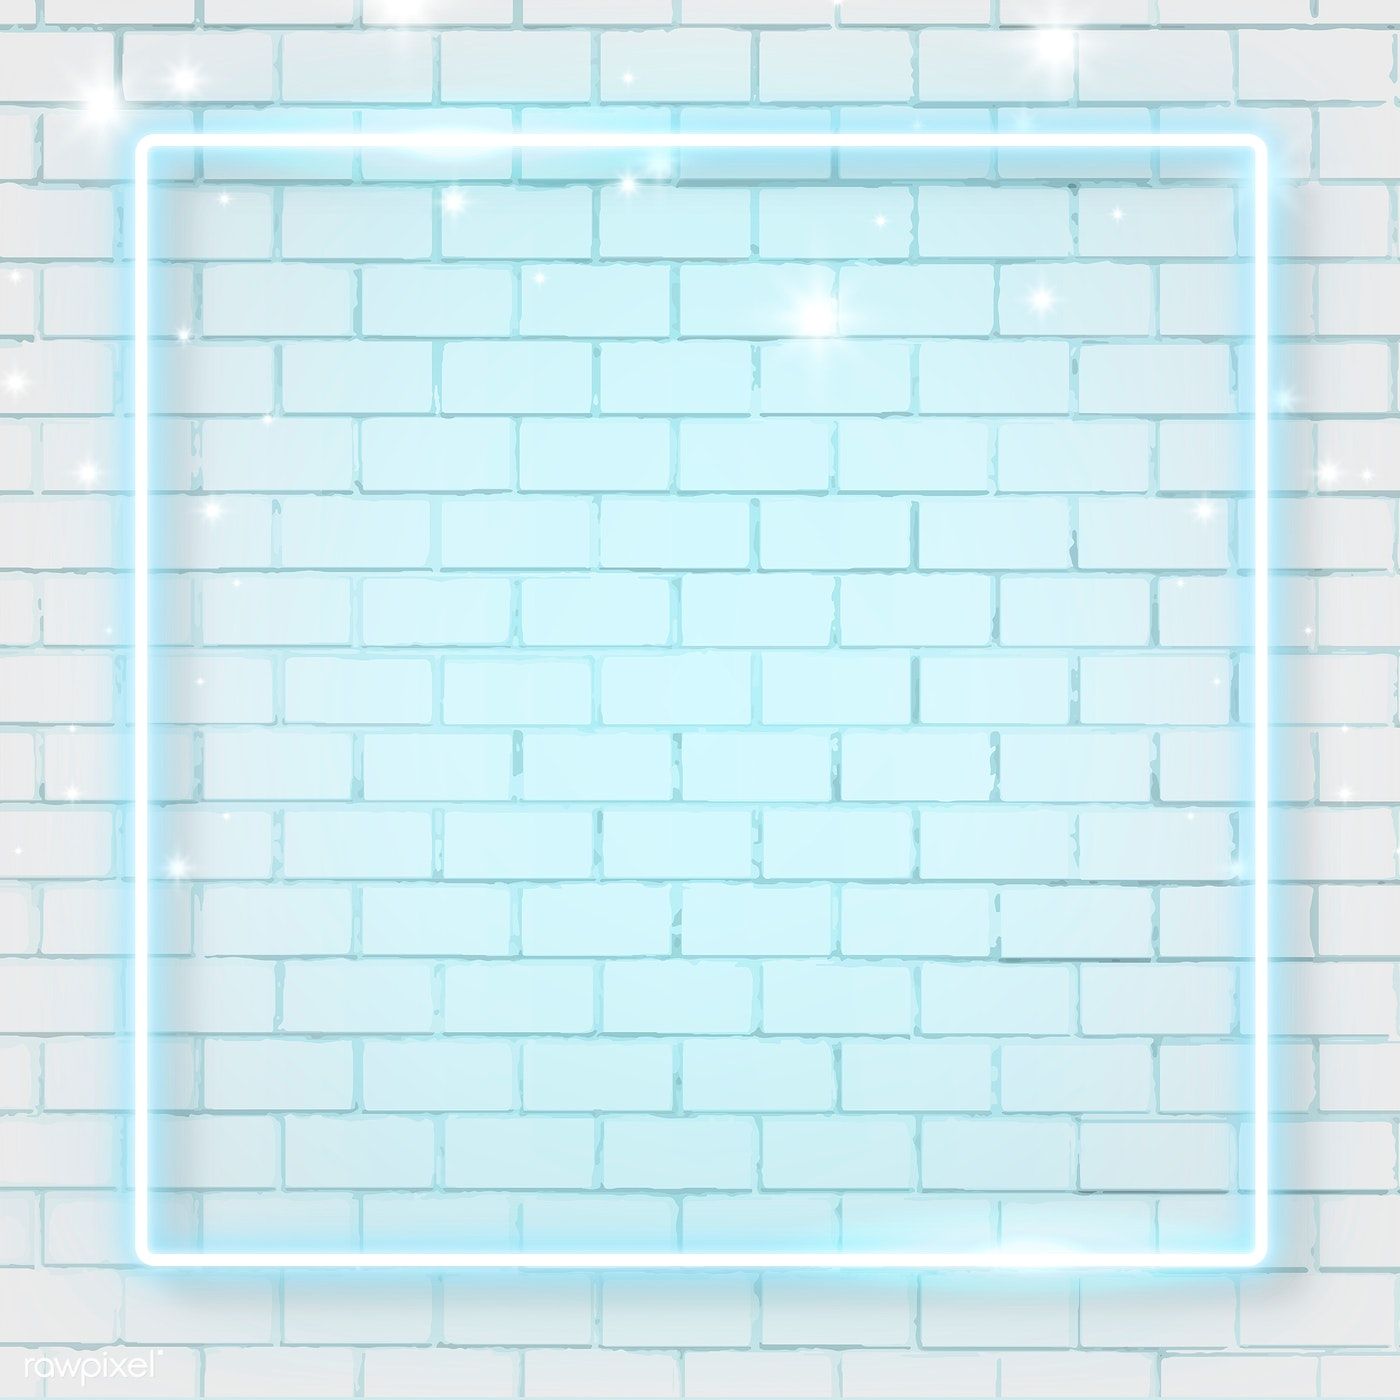 Download premium vector of Square blue neon frame on brick wall background. Brick wall wallpaper, Brick wall background, Wall background